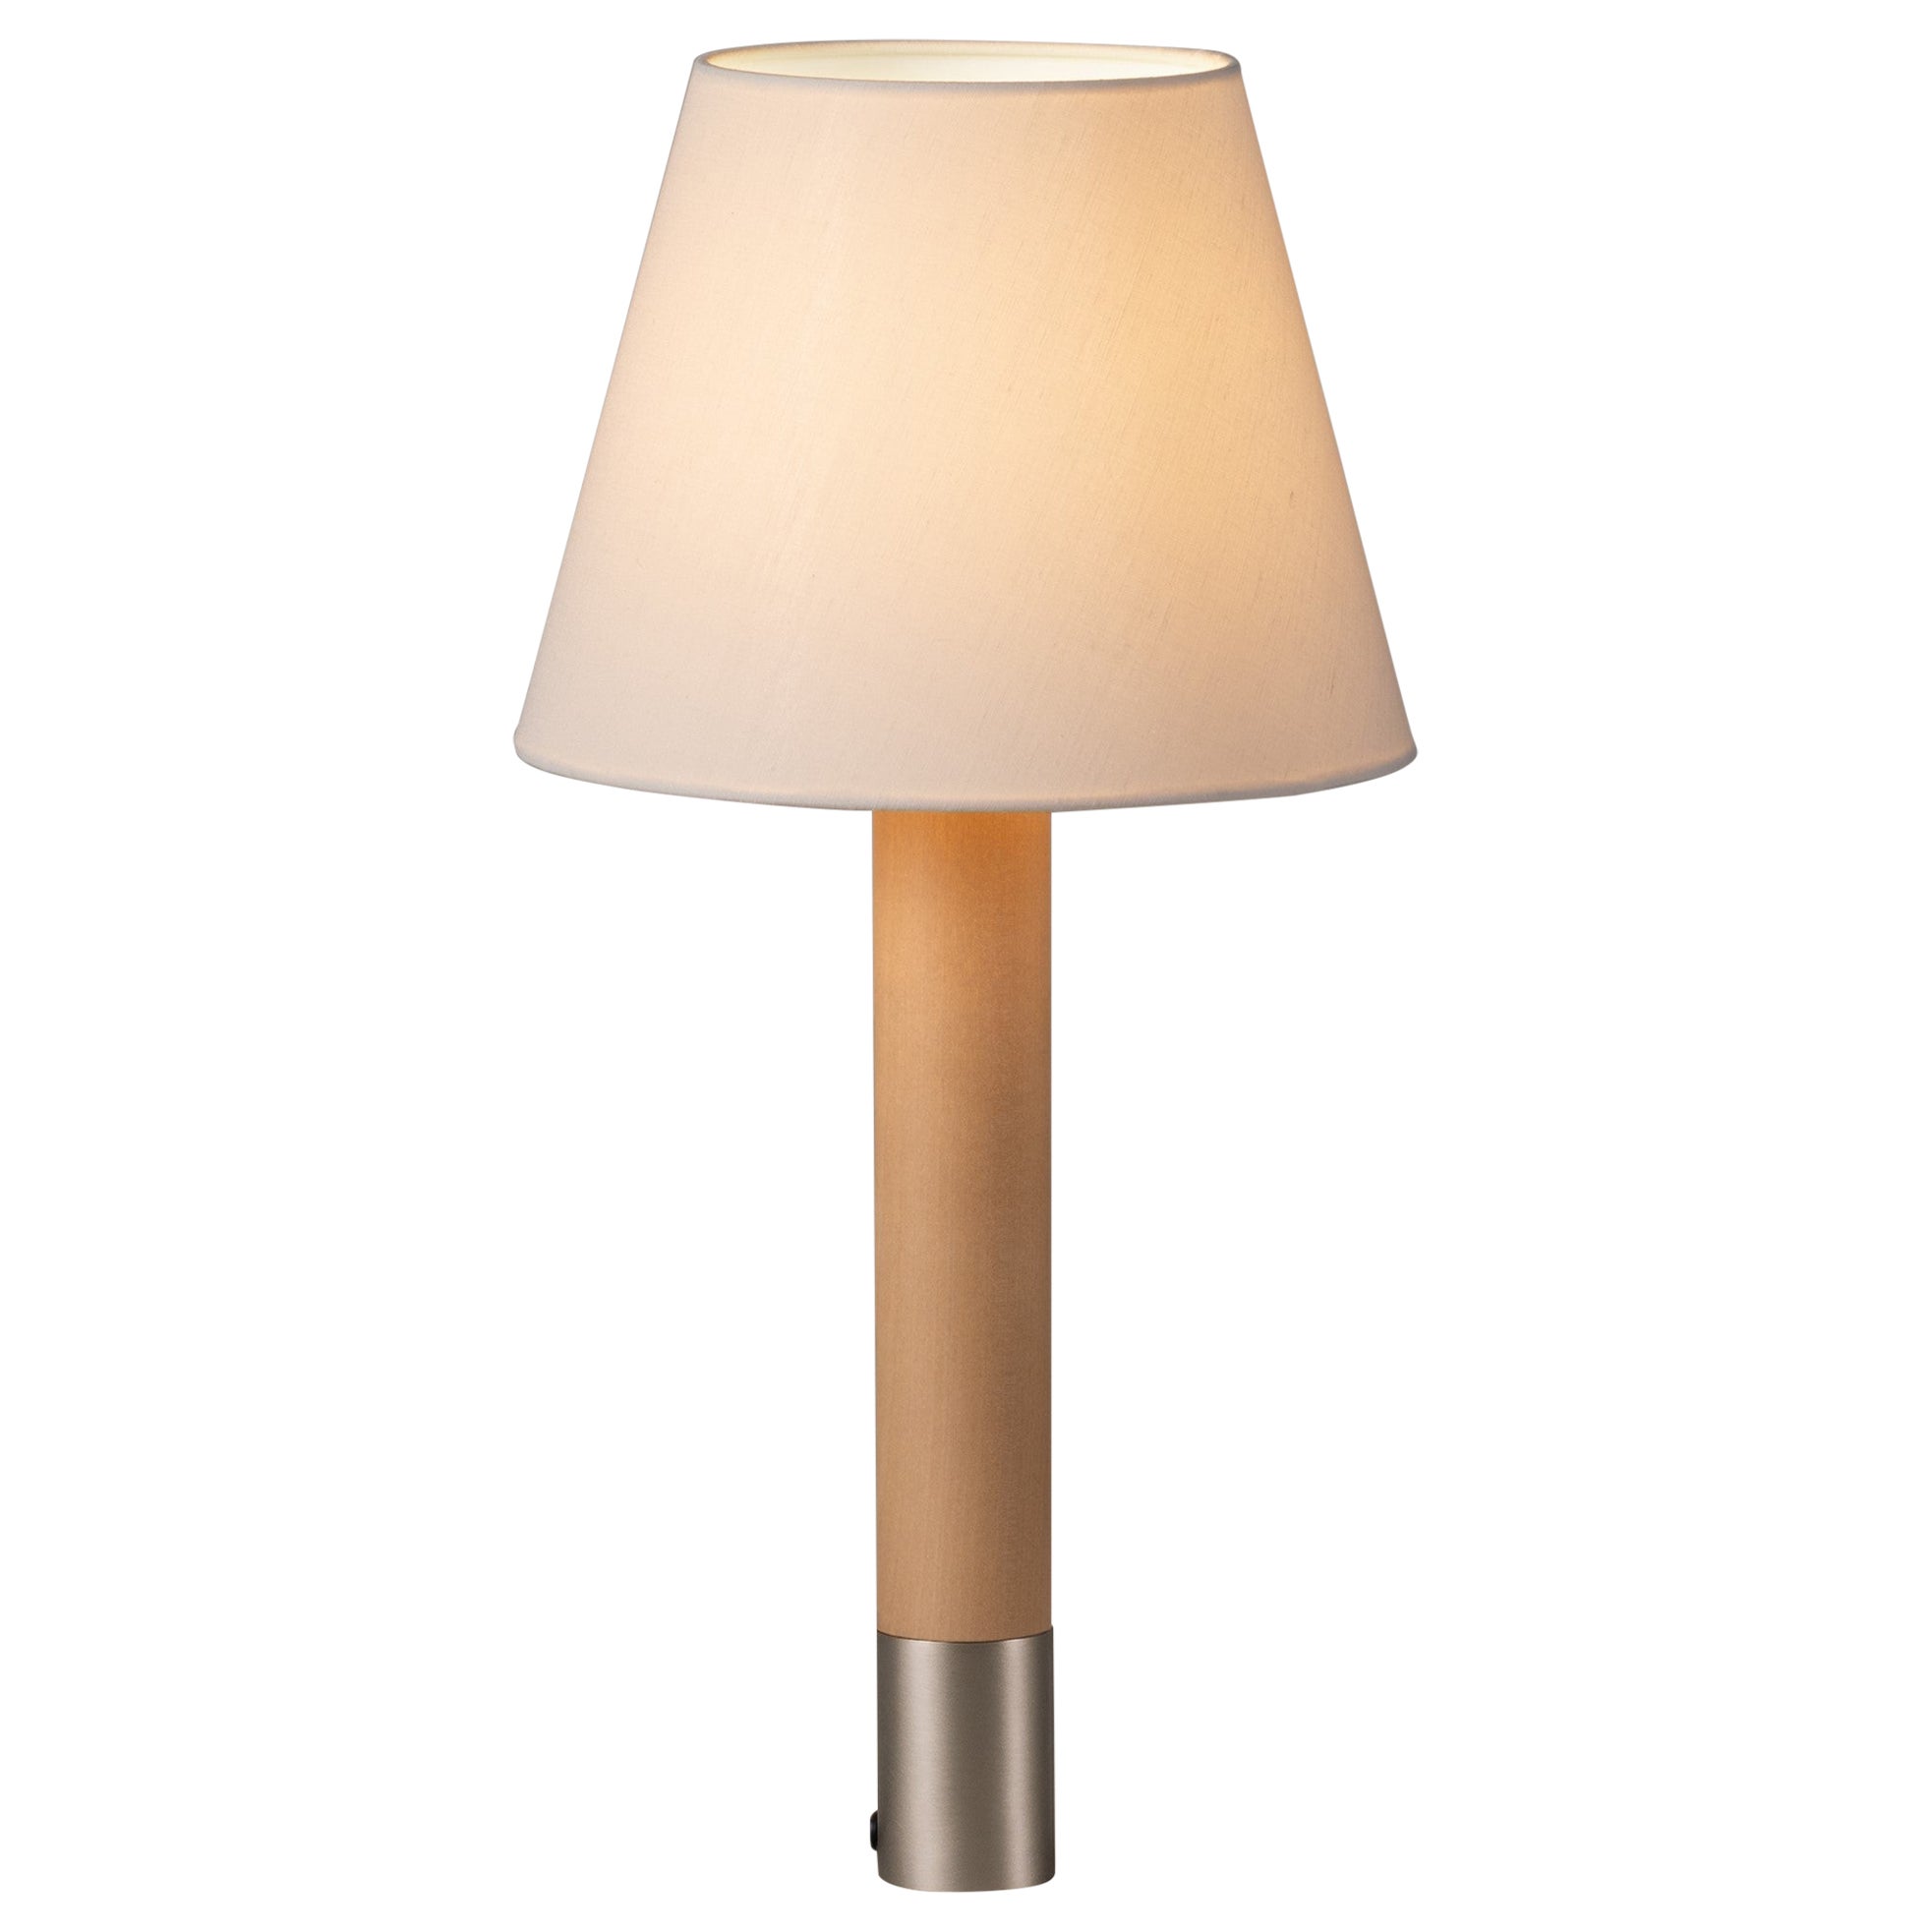 Nickel and White Básica M1 Table Lamp by Santiago Roqueta, Santa & Cole For Sale